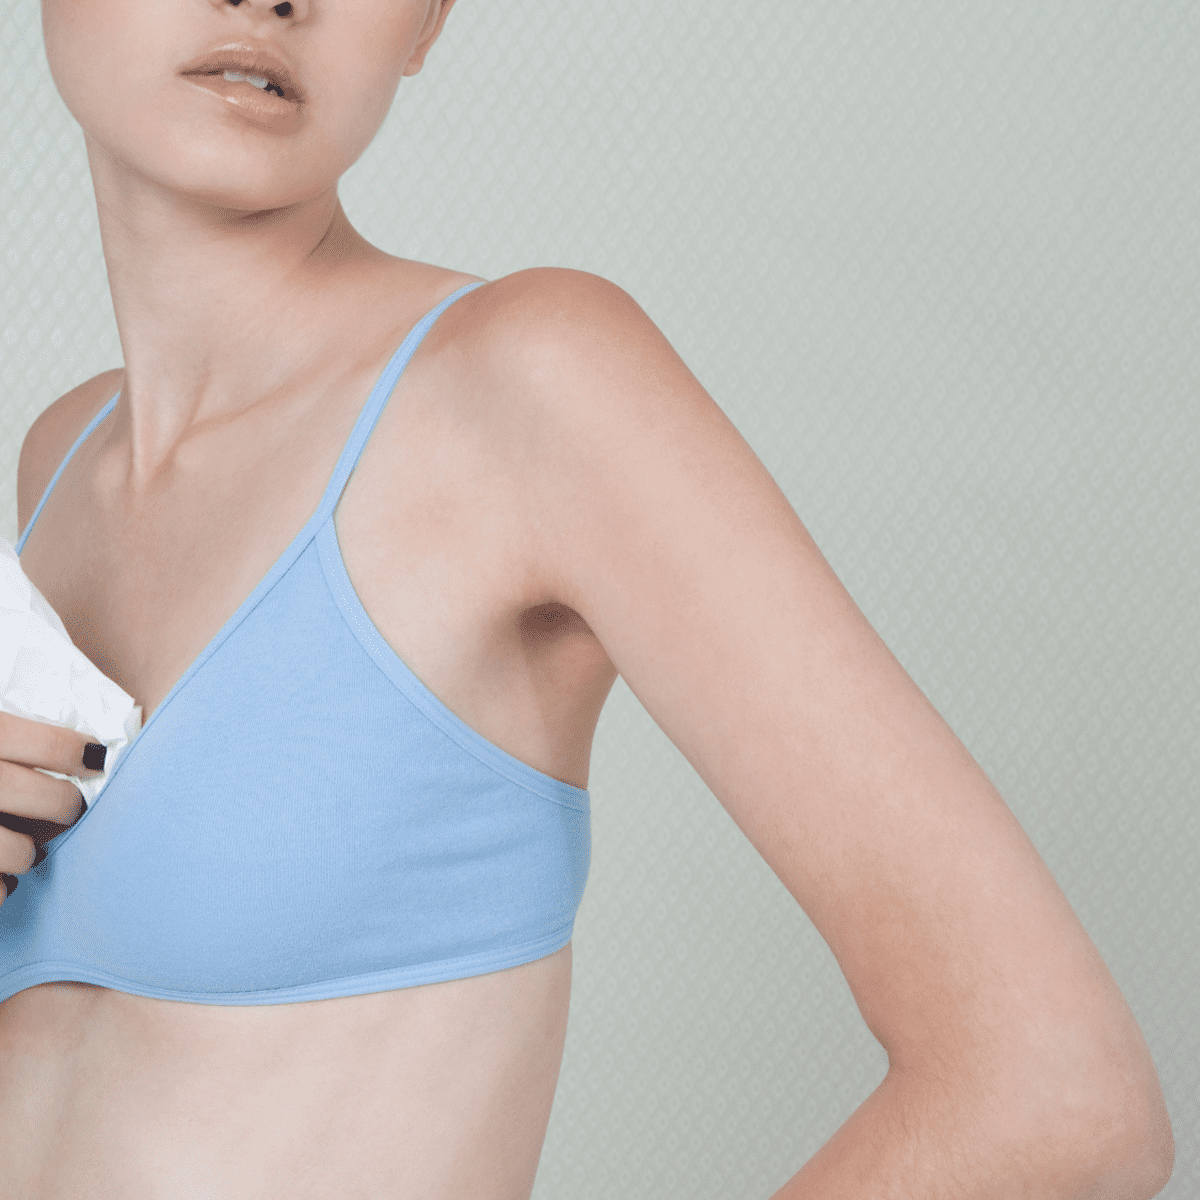 Bras and BB cream: Why aren't brands for women run by them